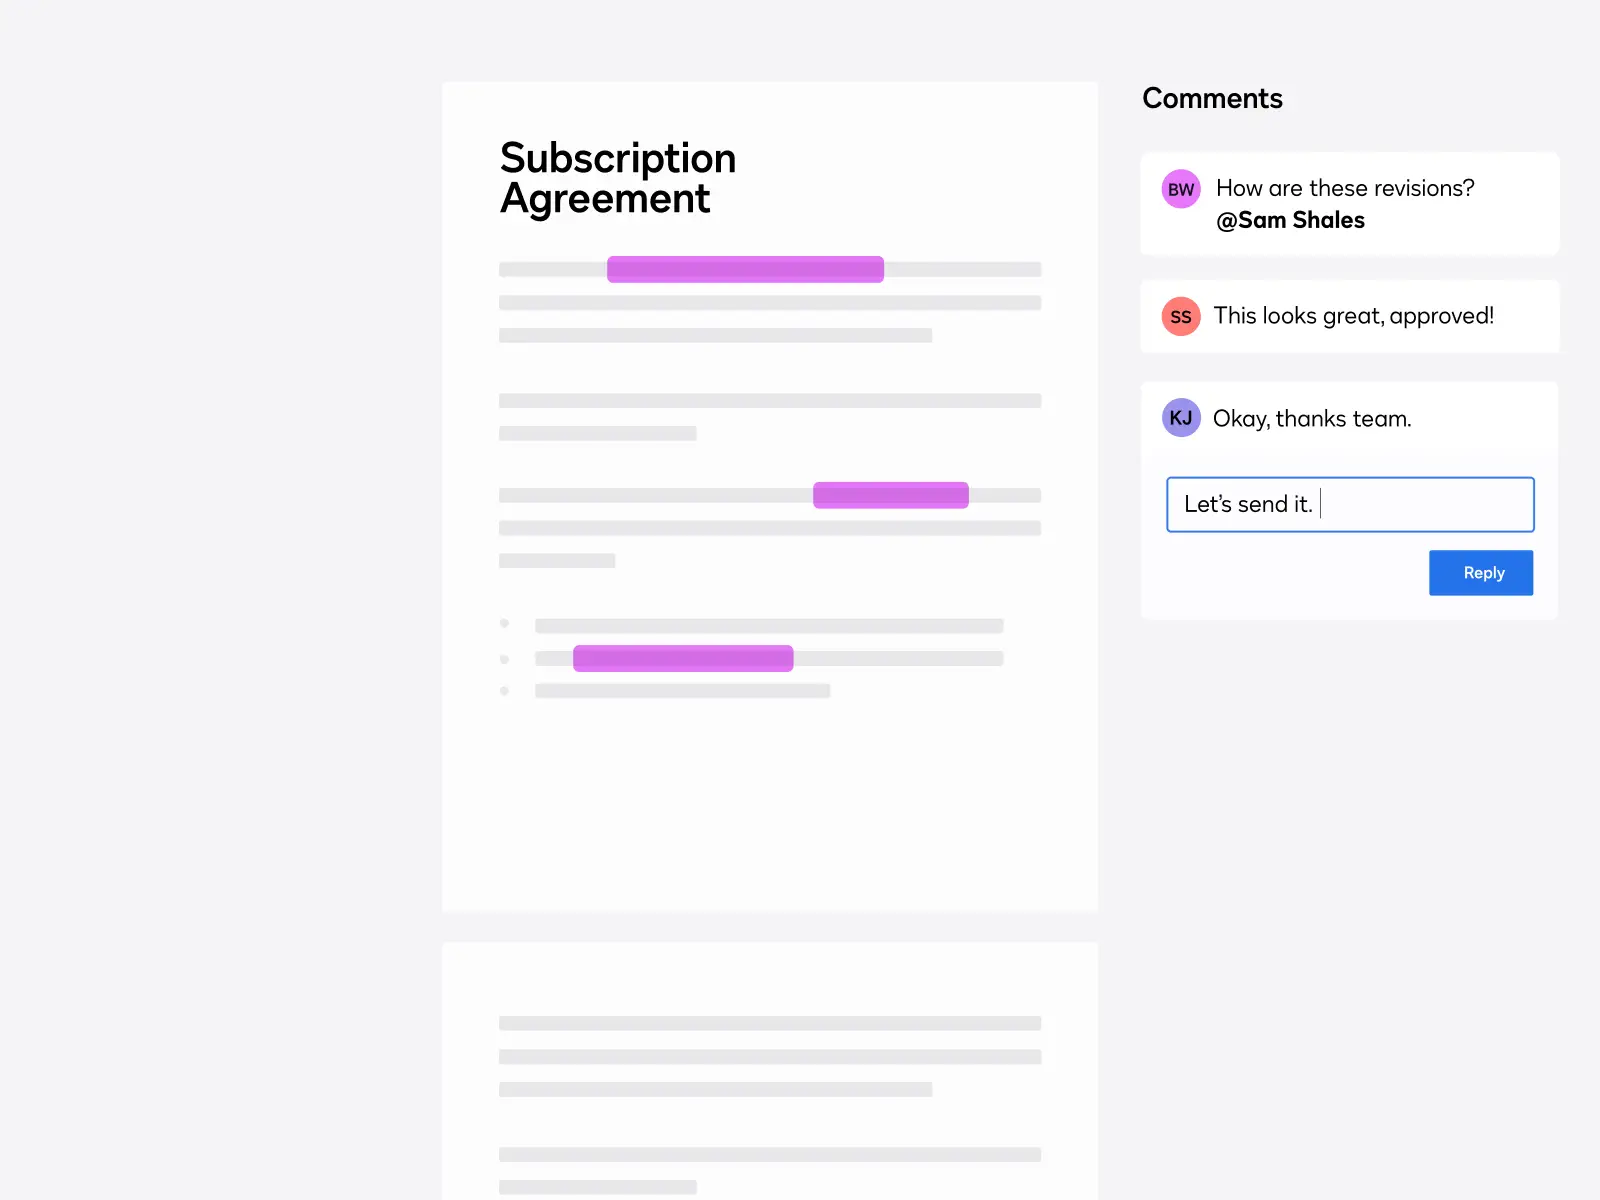 CLM product image of a master subscription and service agreement showing collaboration through user comments.